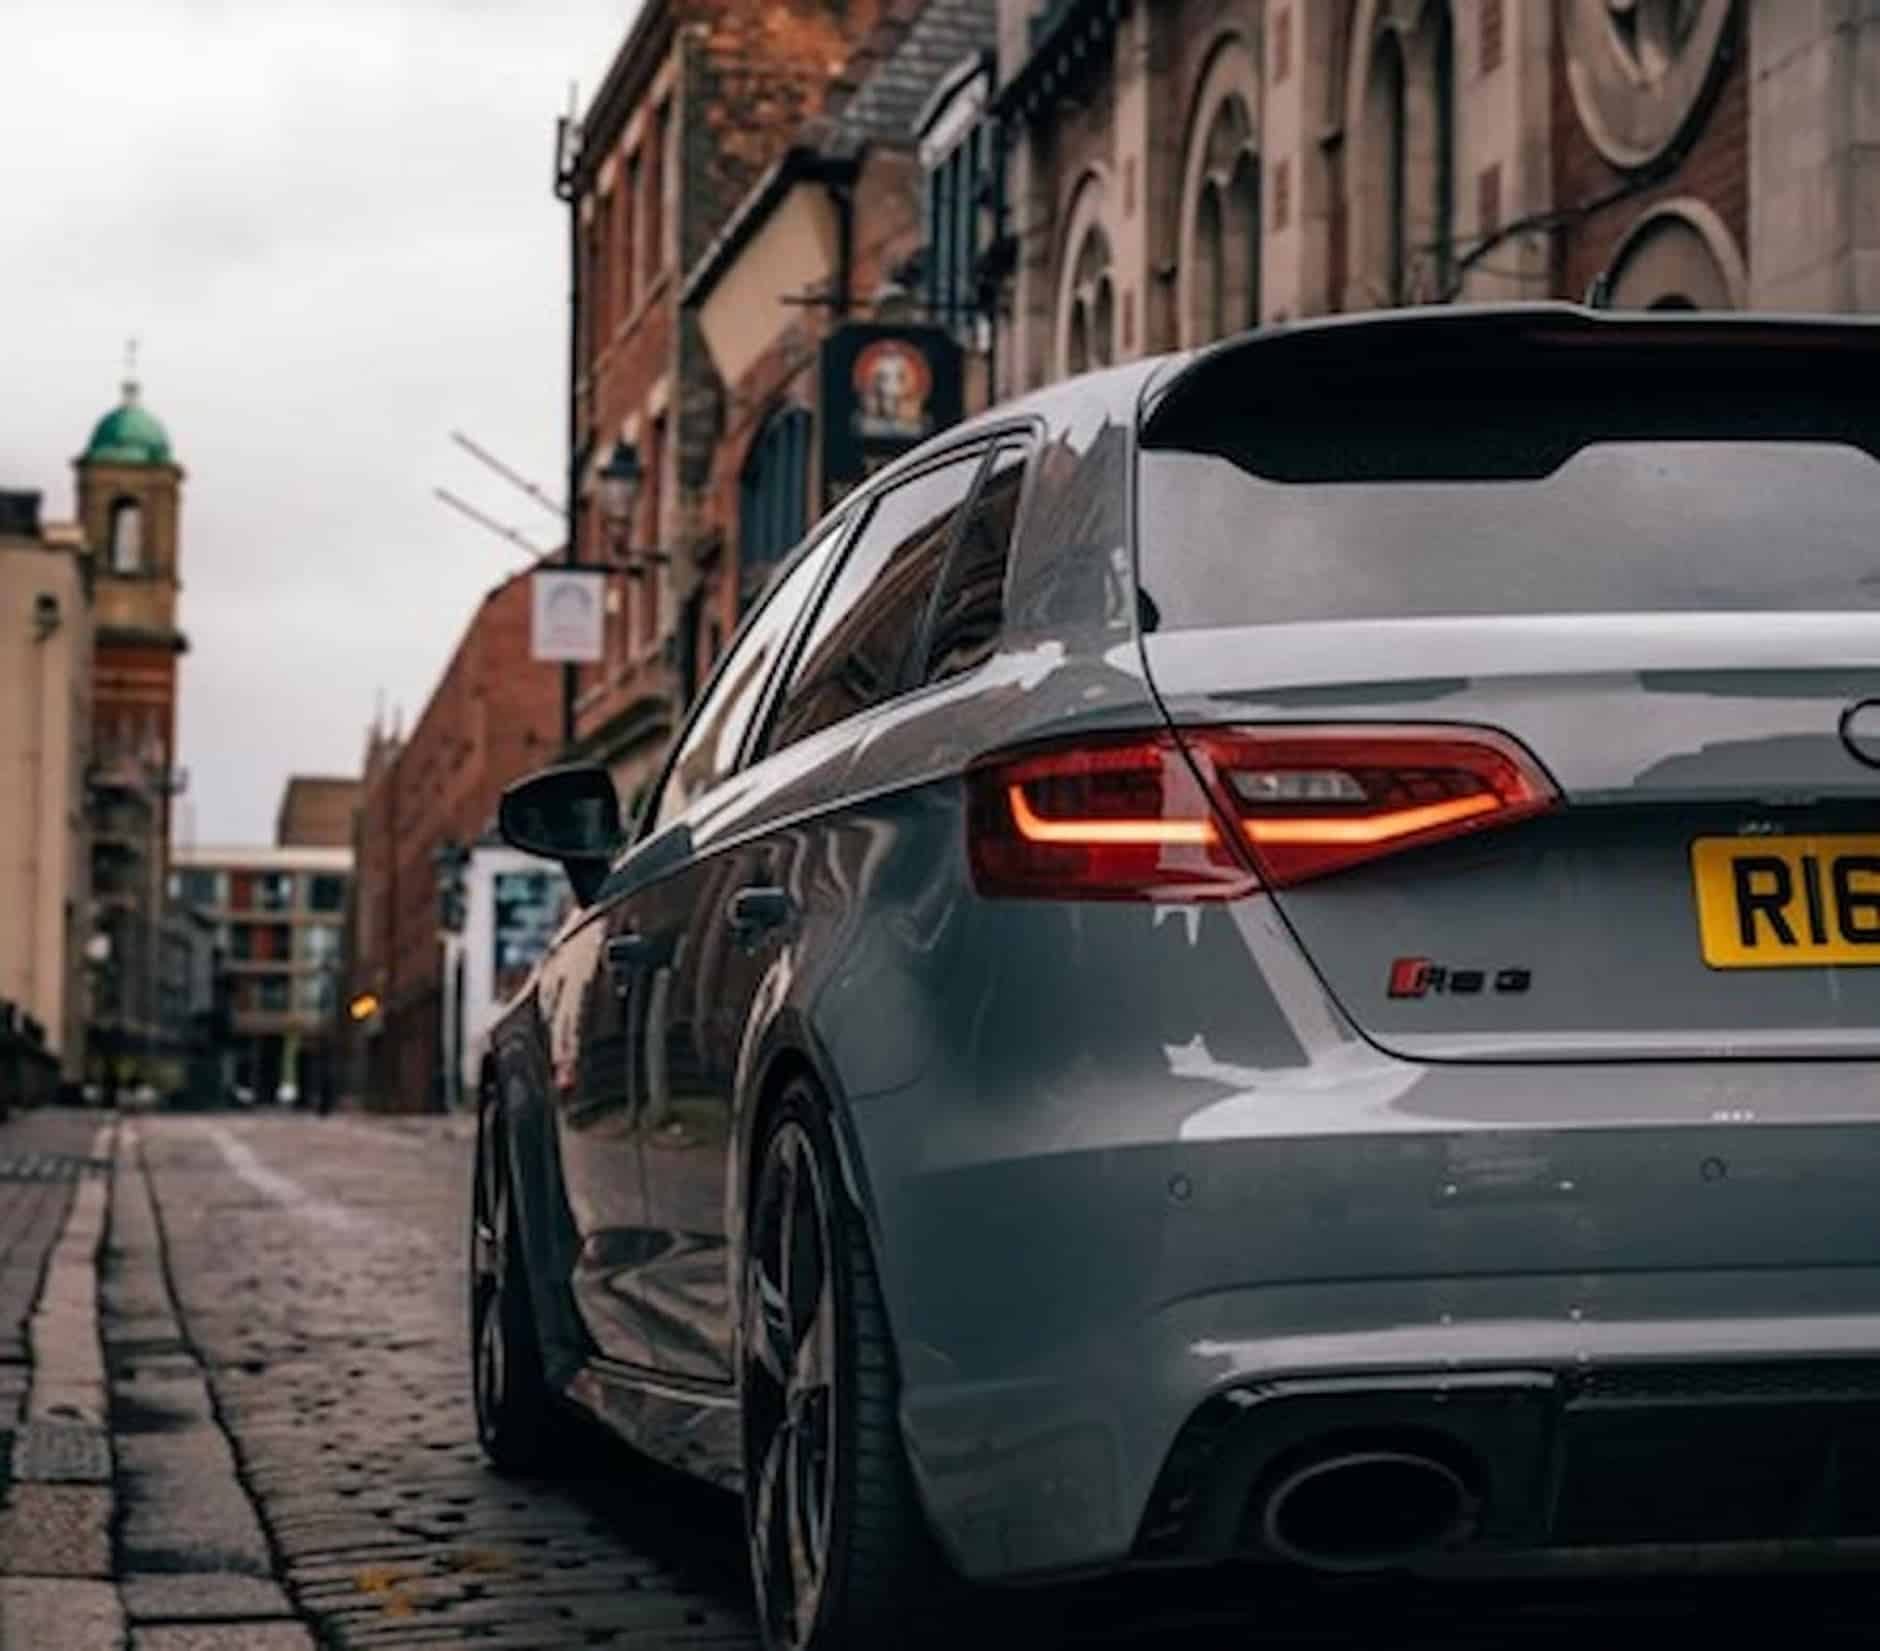 The rear end of an Audi driving along a narrow, cobbled street